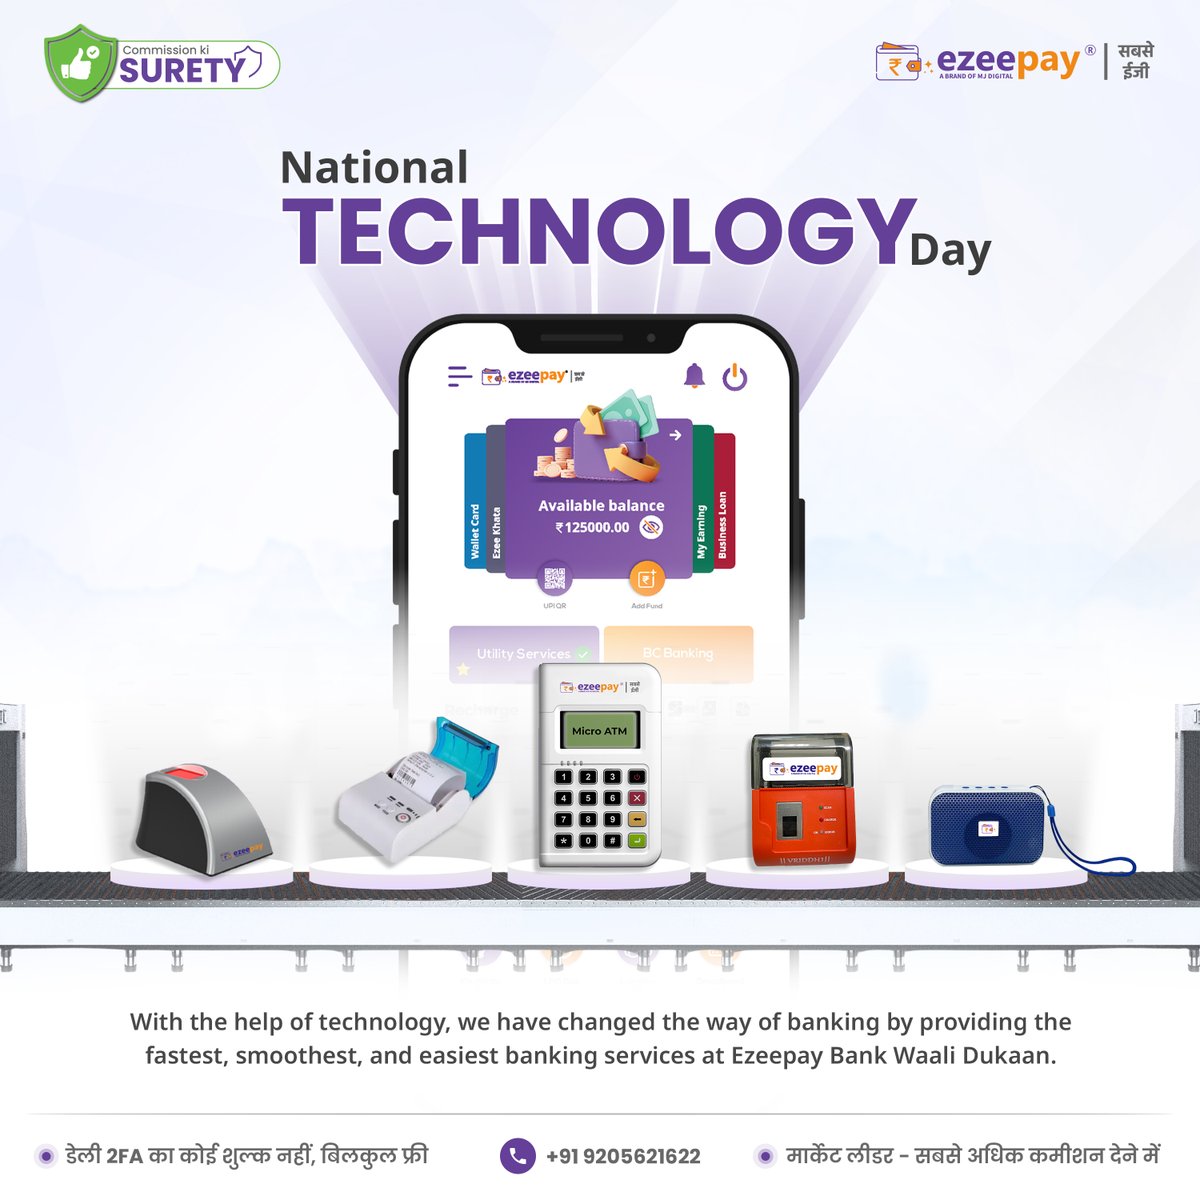 With the help of technology, we have changed the way of banking by providing the fastest, smoothest, and easiest banking services at Ezeepay Bank Waali Dukaan.
We Wish You A Happy National Technology Day.
#NationalTechnologyDay #technology #technologyday #indian #Ezeepay